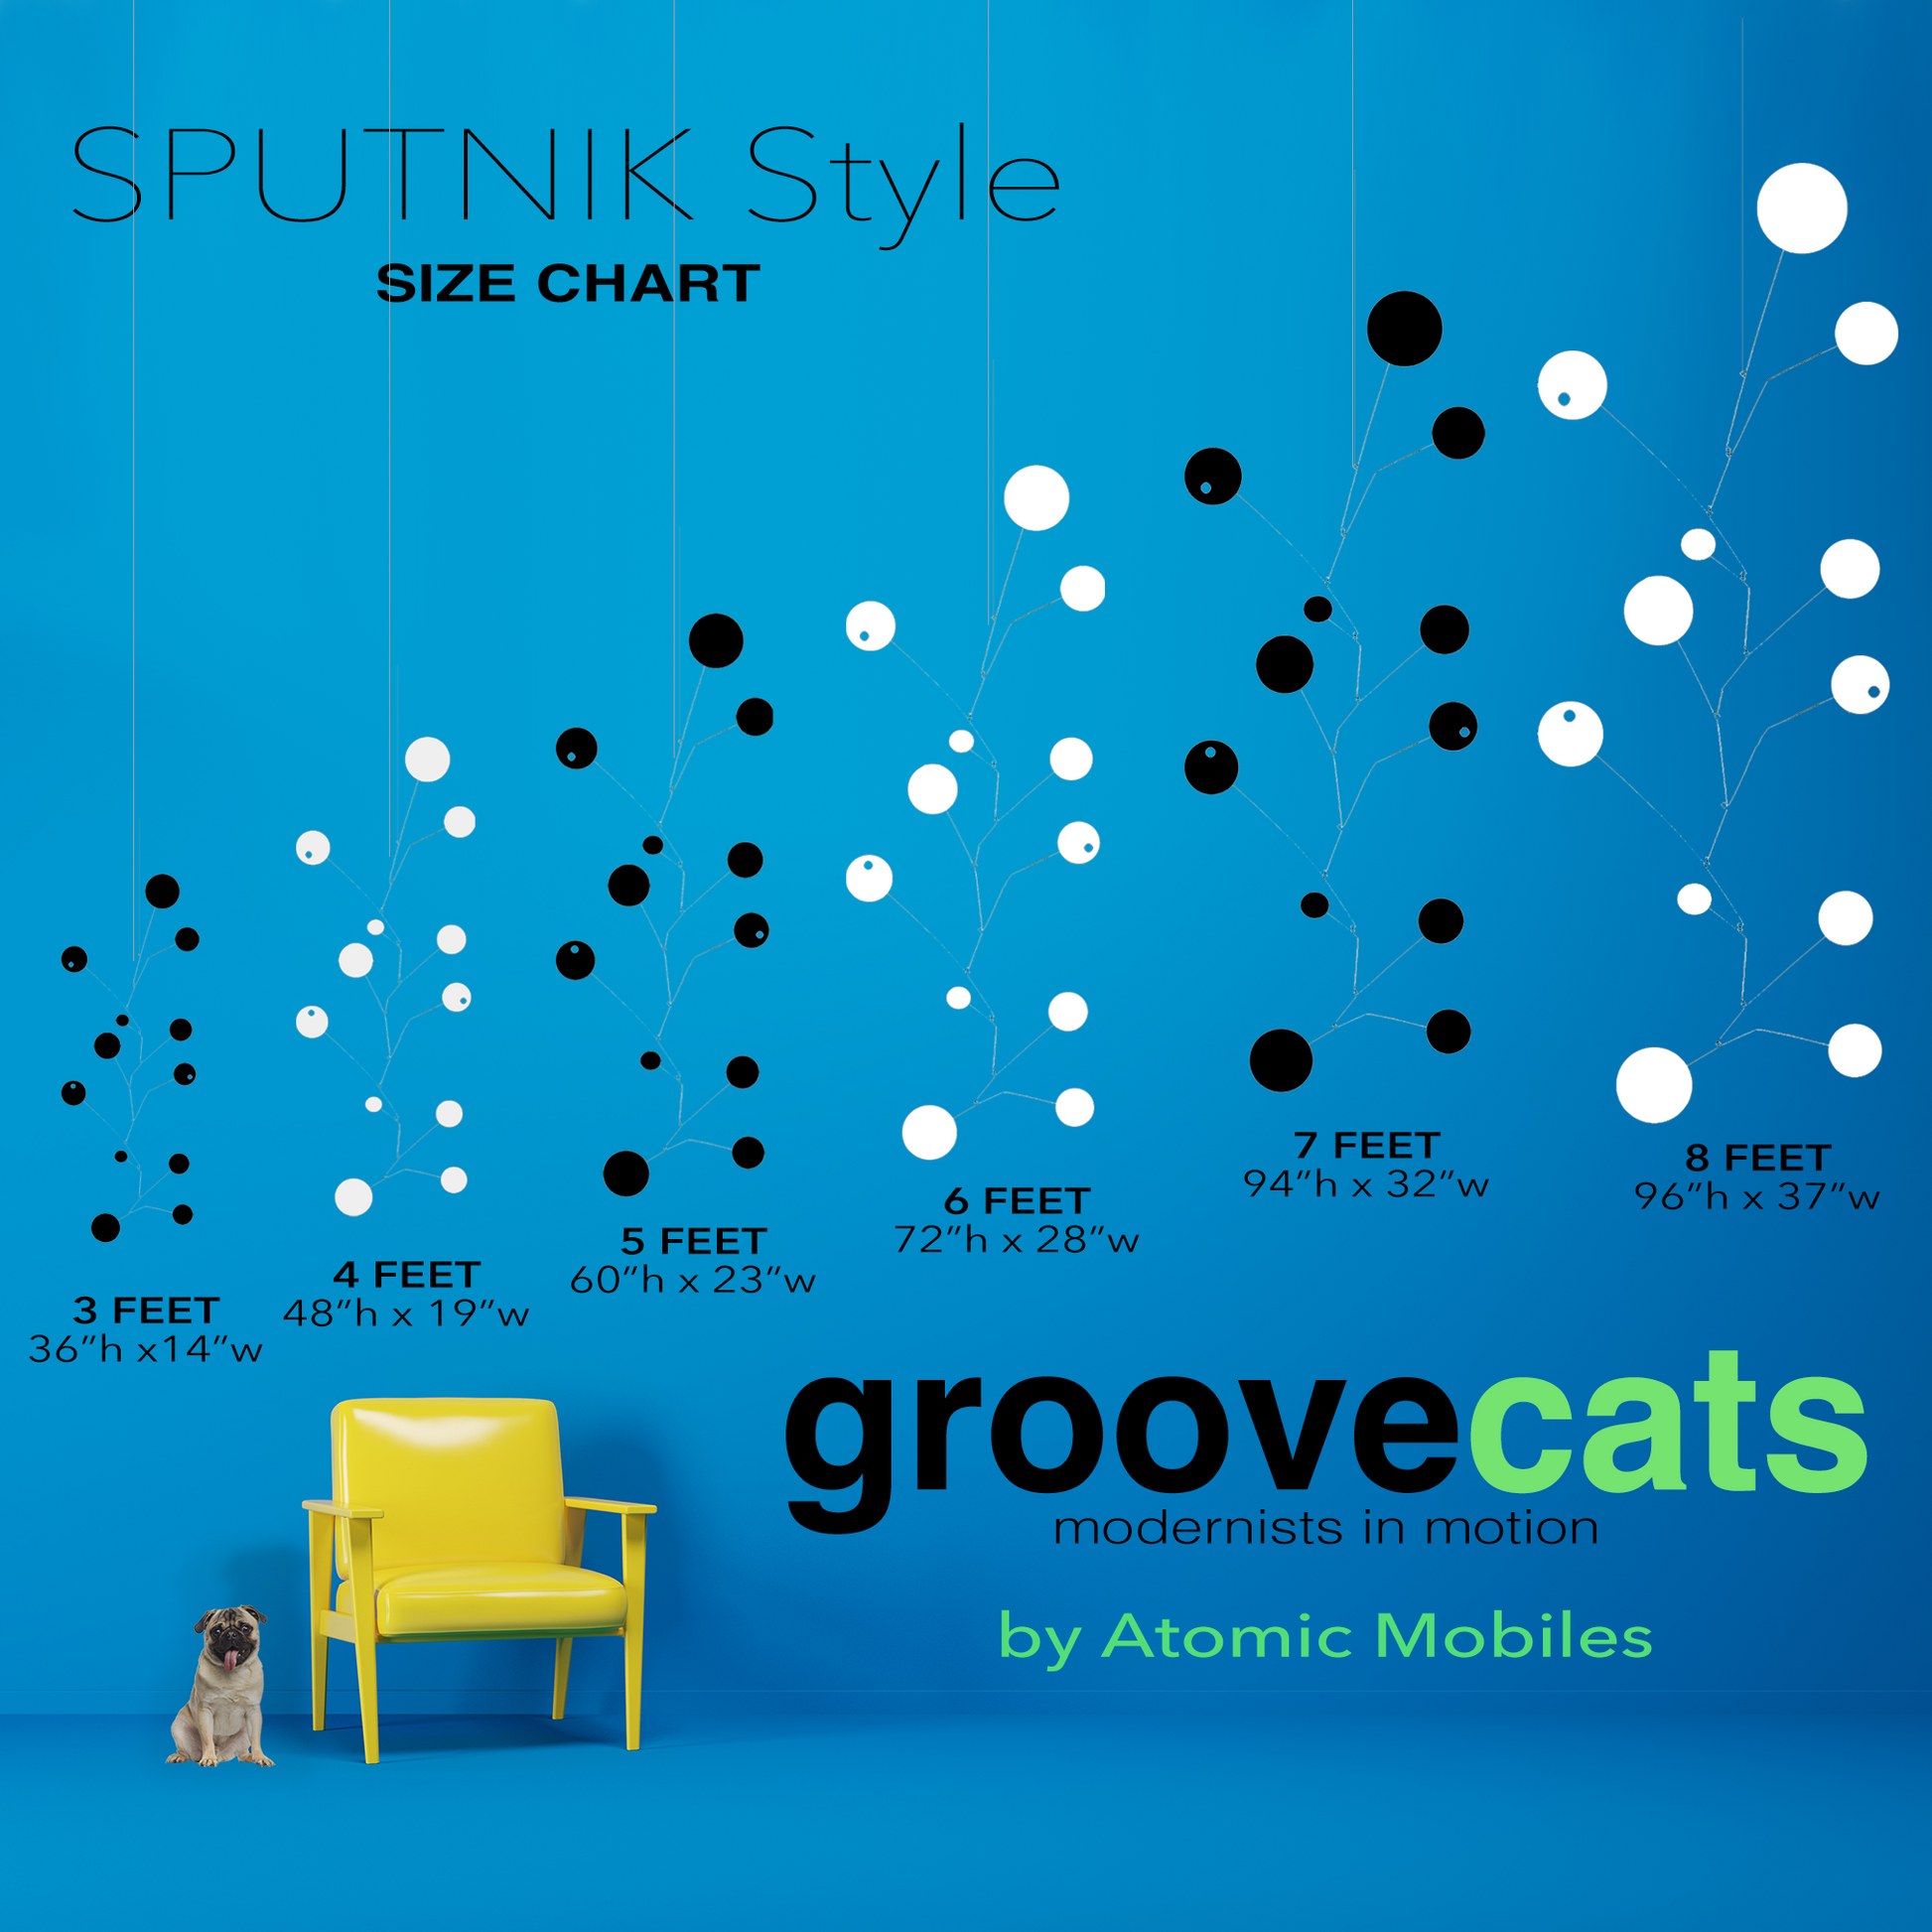 Size Chart for SPUTNIK hanging art mobiles in mid century modern space age Calder style - 6 sizes - shown with cute pug dog and yellow chair with blue wall - mobiles by AtomicMobiles.com